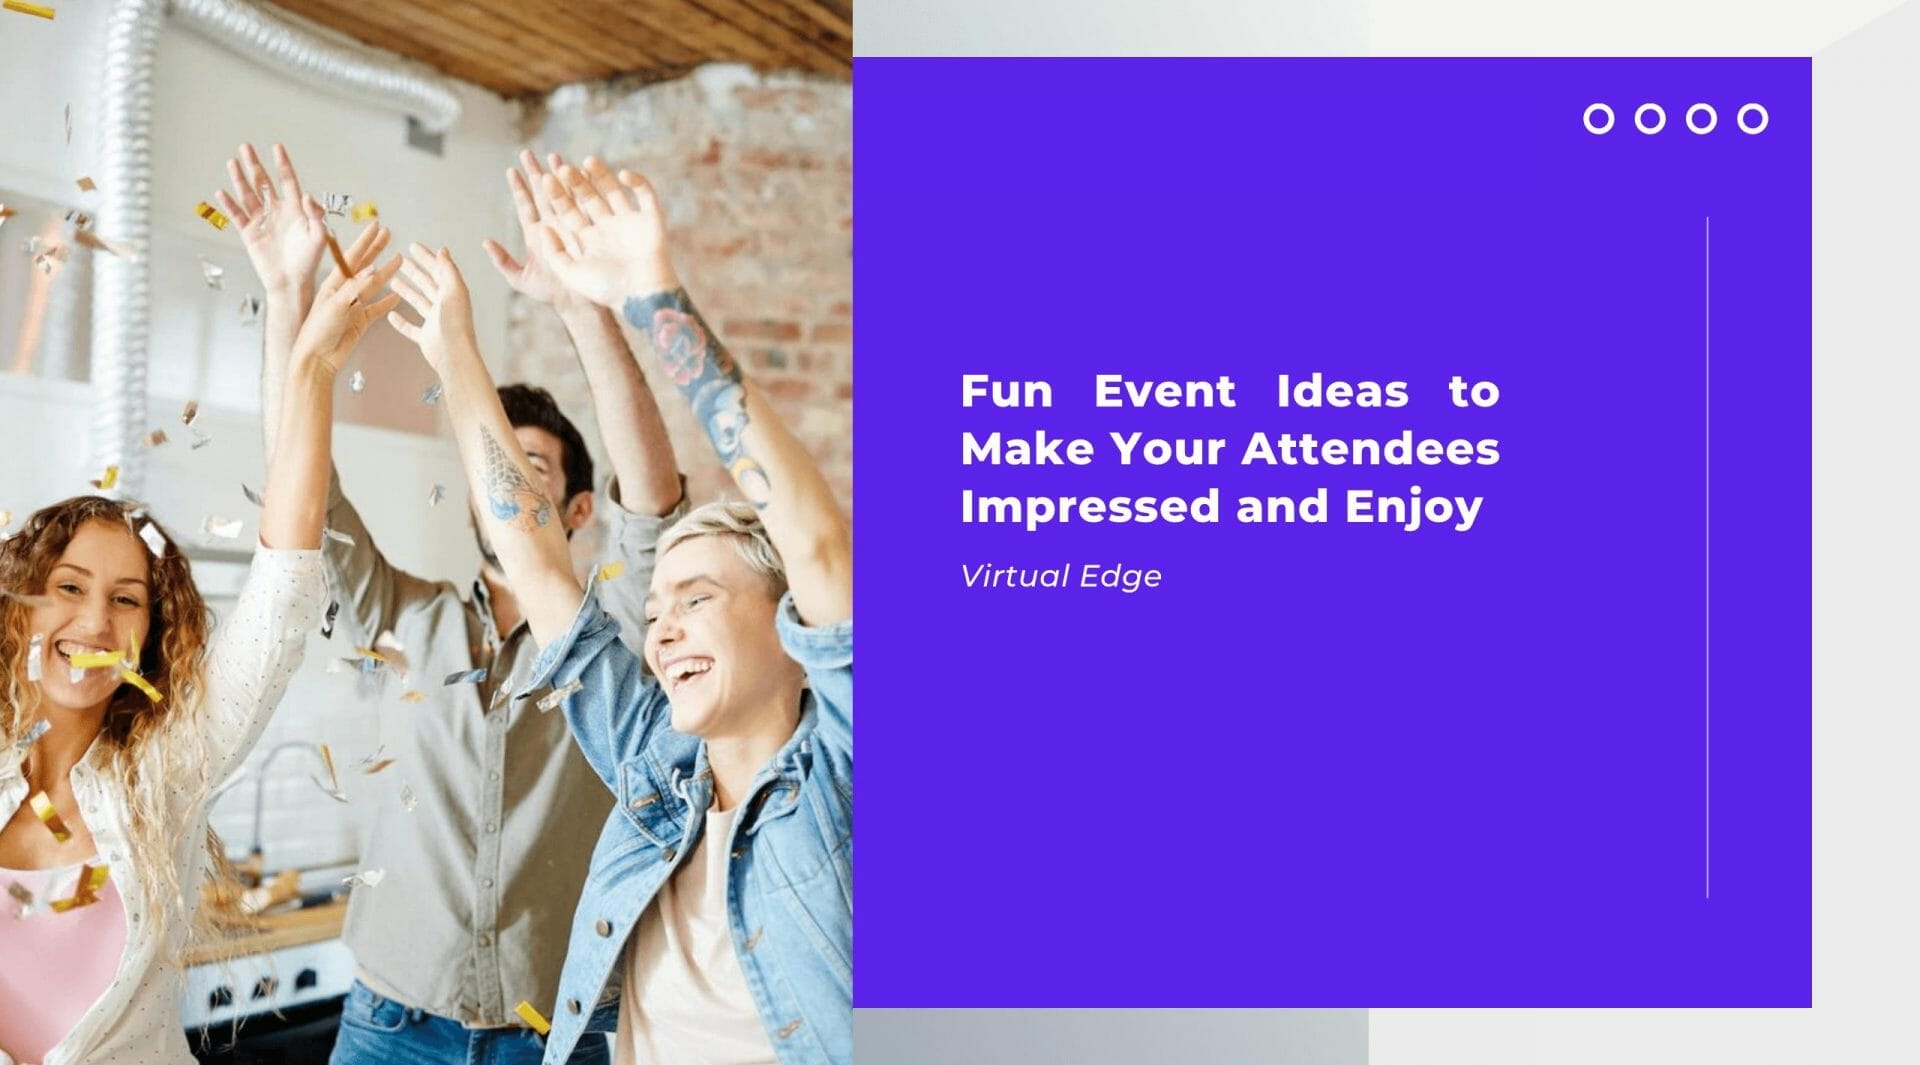 Fun Event Ideas to Make Your Attendees Impressed and Enjoy